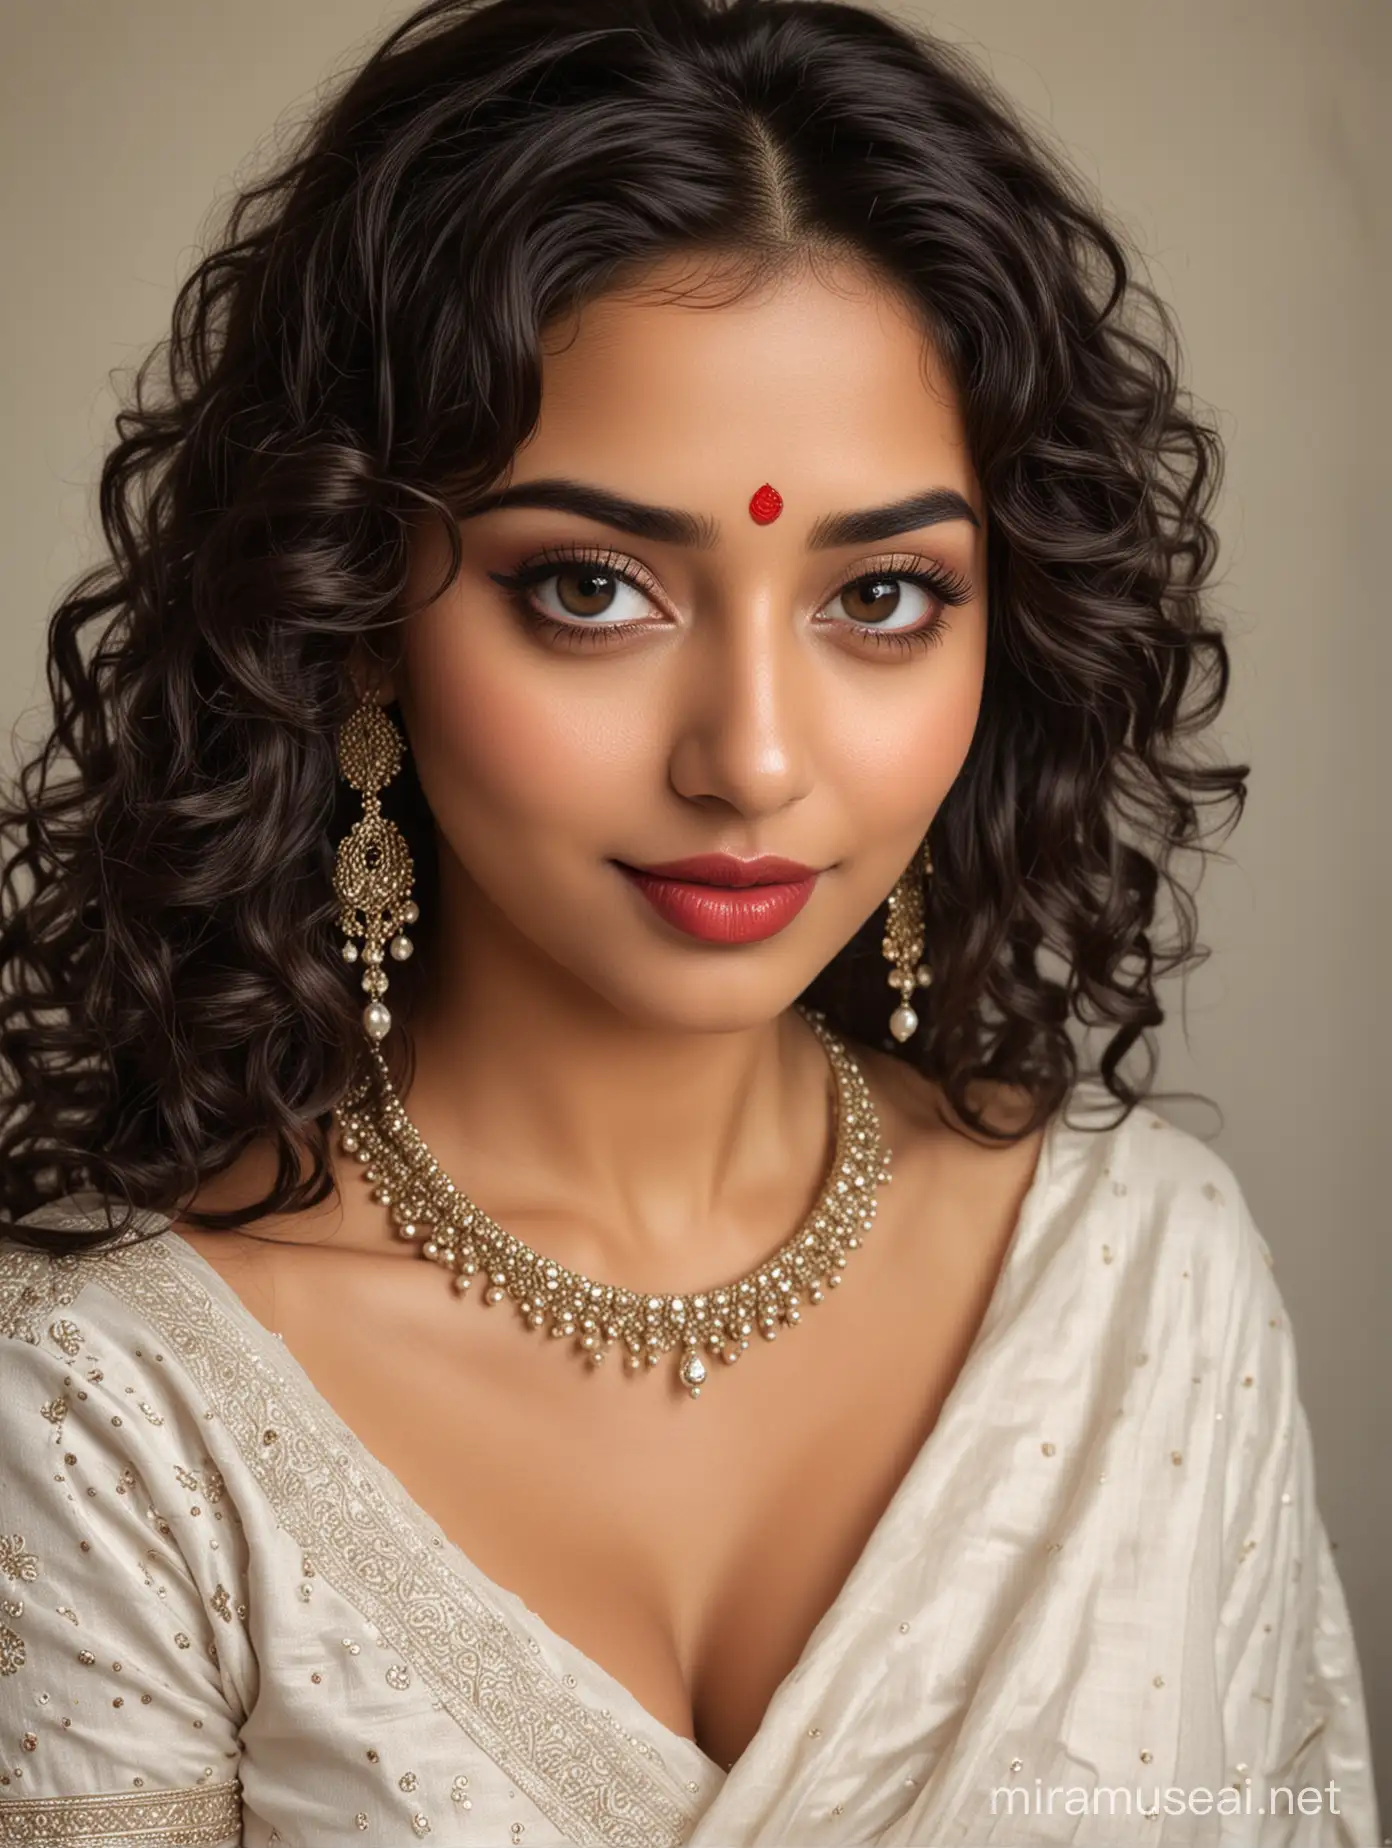 full body photo of most beautiful european woman as beautiful indian woman, big wide  black eyes with eye makeup,  thick long curly hair , face completely bent down, wide big eyes, brows raised, eyes looking up, looking back over shoulders, innocent alluring sexy looks, shy wide smile, intimate looks, bridal makeup, full body jewelry, perfect symmetric face and eyes, full breasts, glossy dark red lipsticks, intimate alluring smile, come get me looks , vulnerable i am yours feeling in looks, elegant traditional  modest saree  , elegant look, biting lip with ecstasy, 
 blushed cheeks, intricate details, photo realistic, 4k.